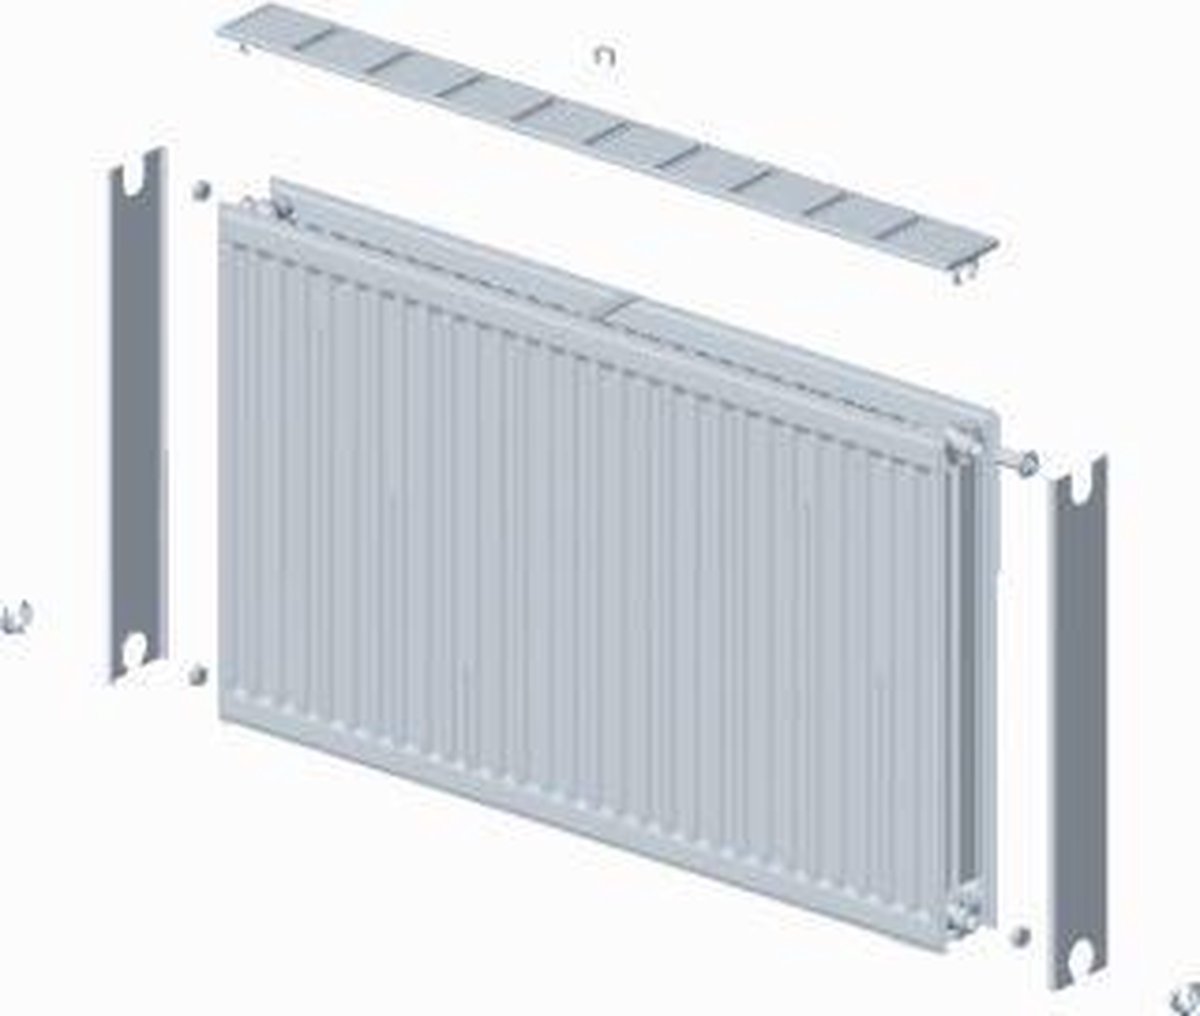 Stelrad paneelradiator Novello, staal, wit, (hxlxd) 400x1200x100mm, 22